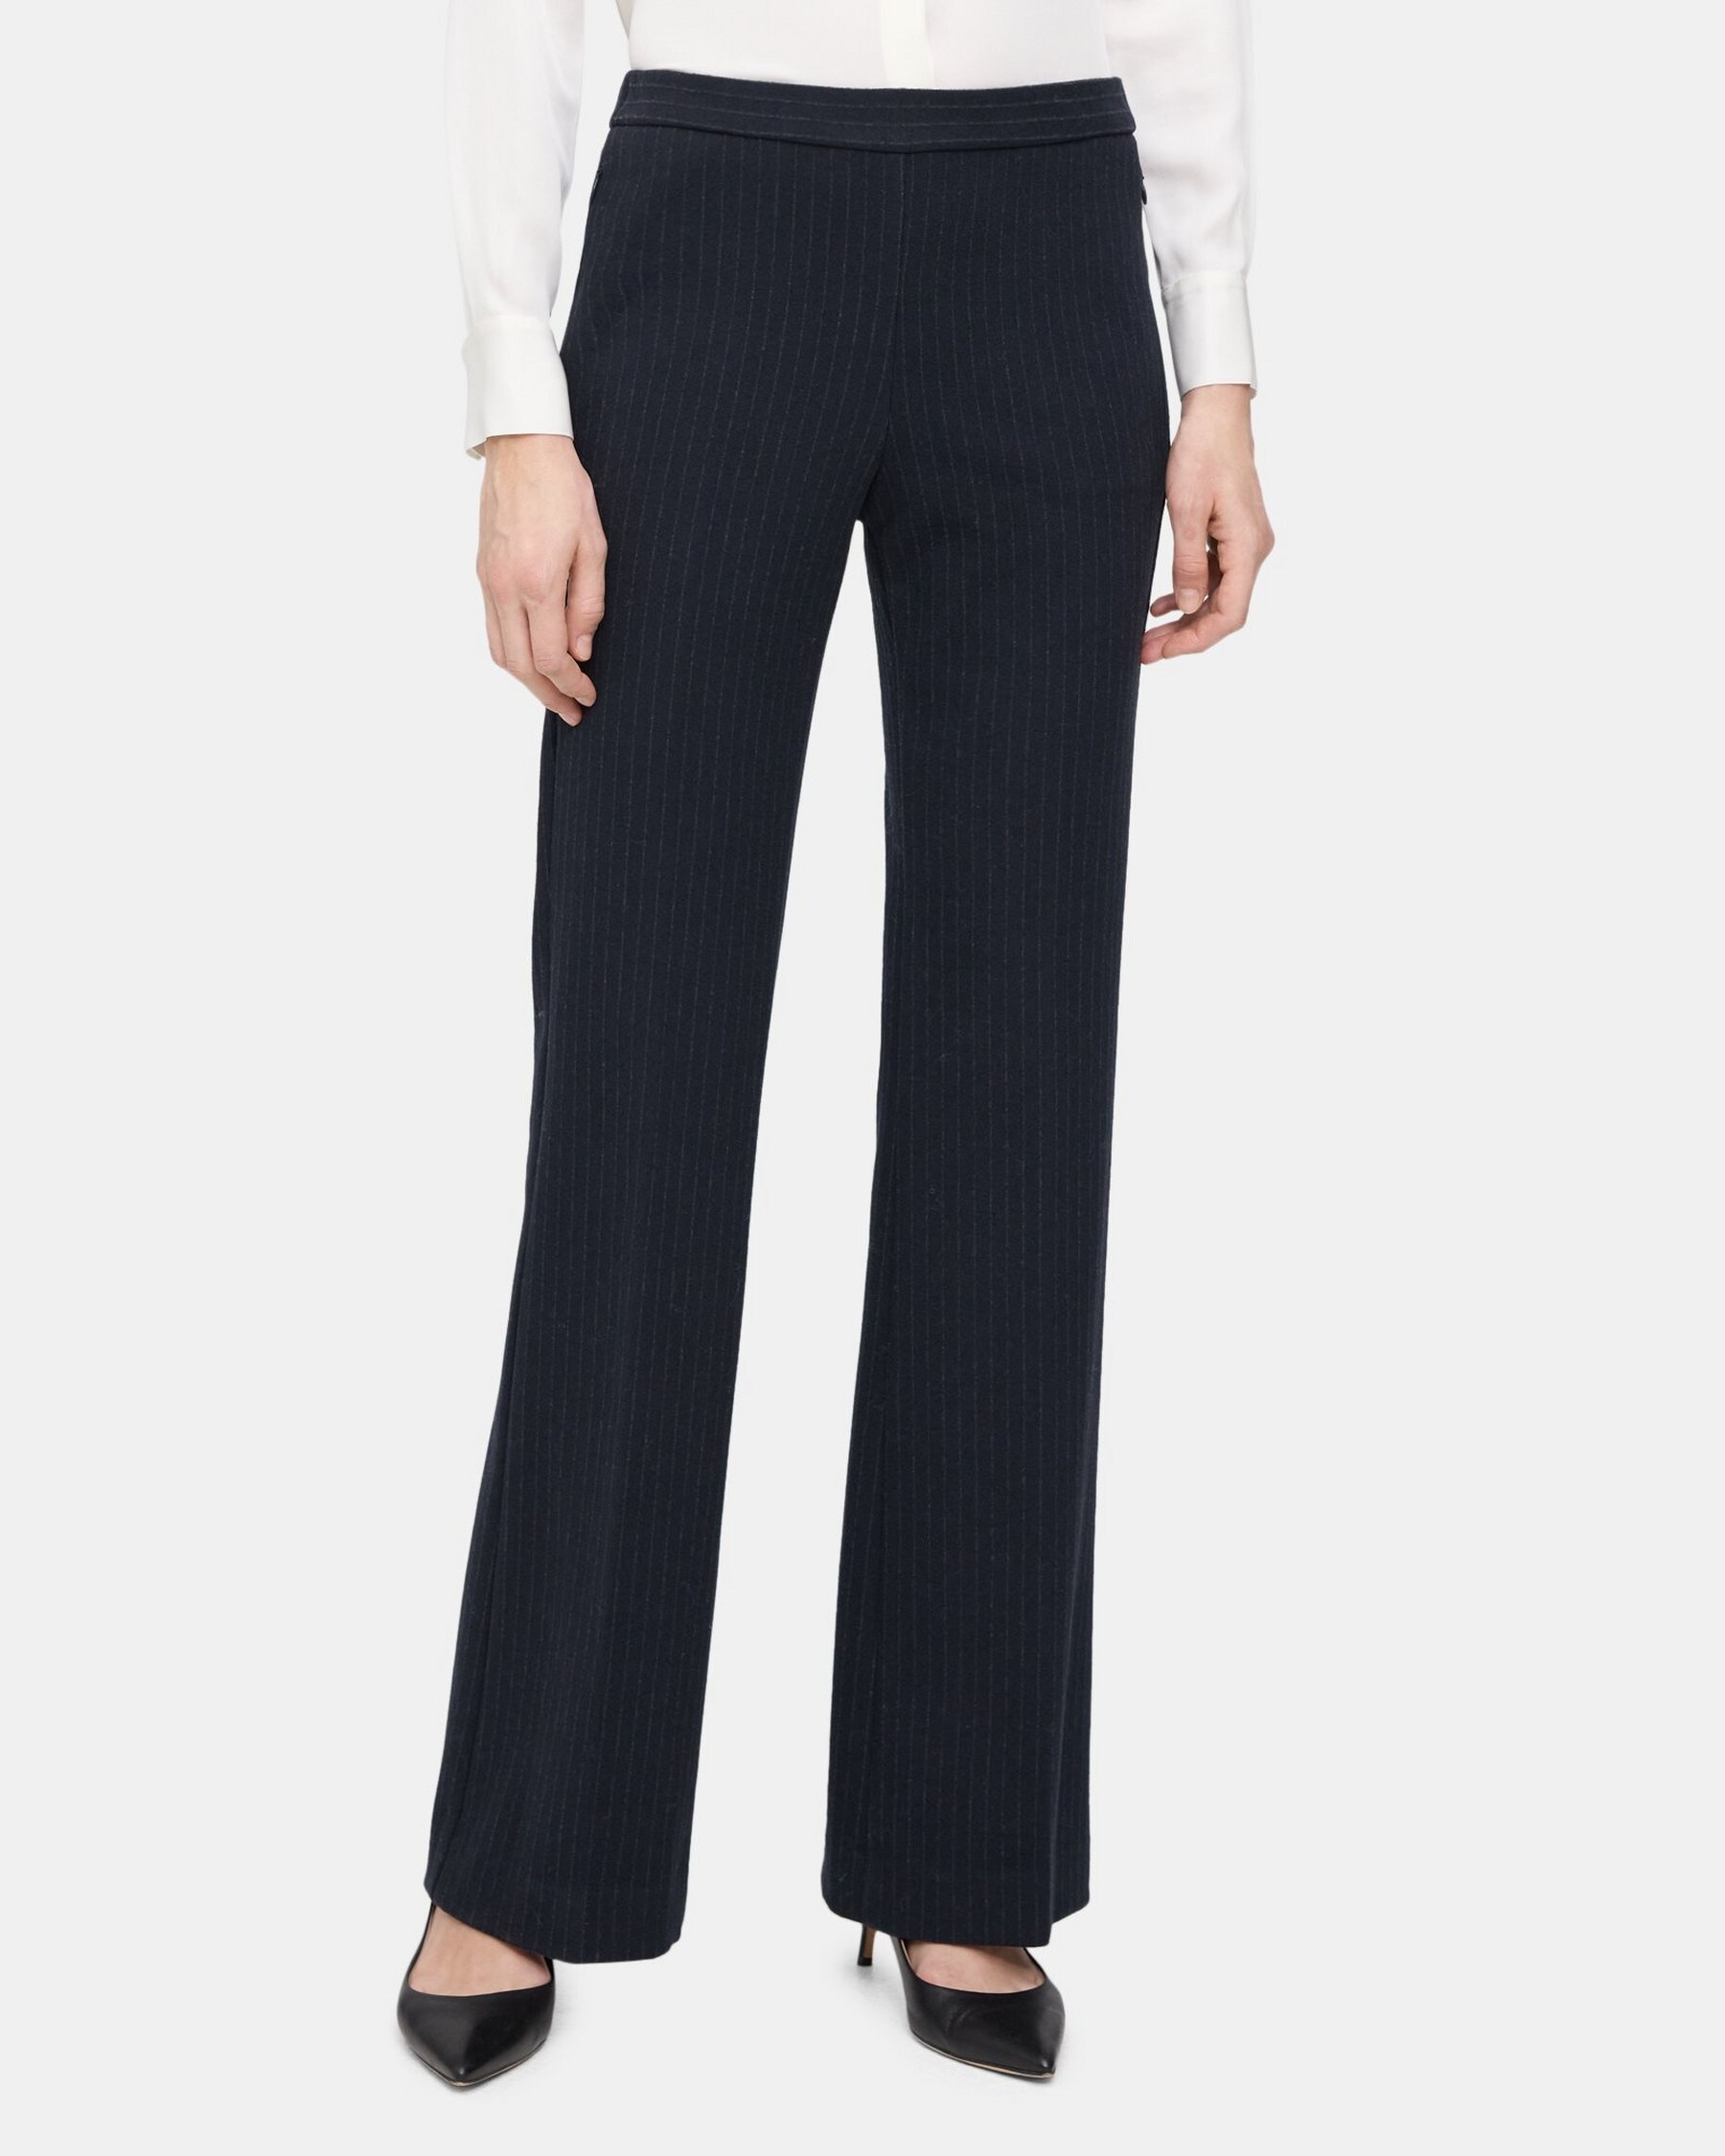 Theory Flare Pant in Pinstripe Knit